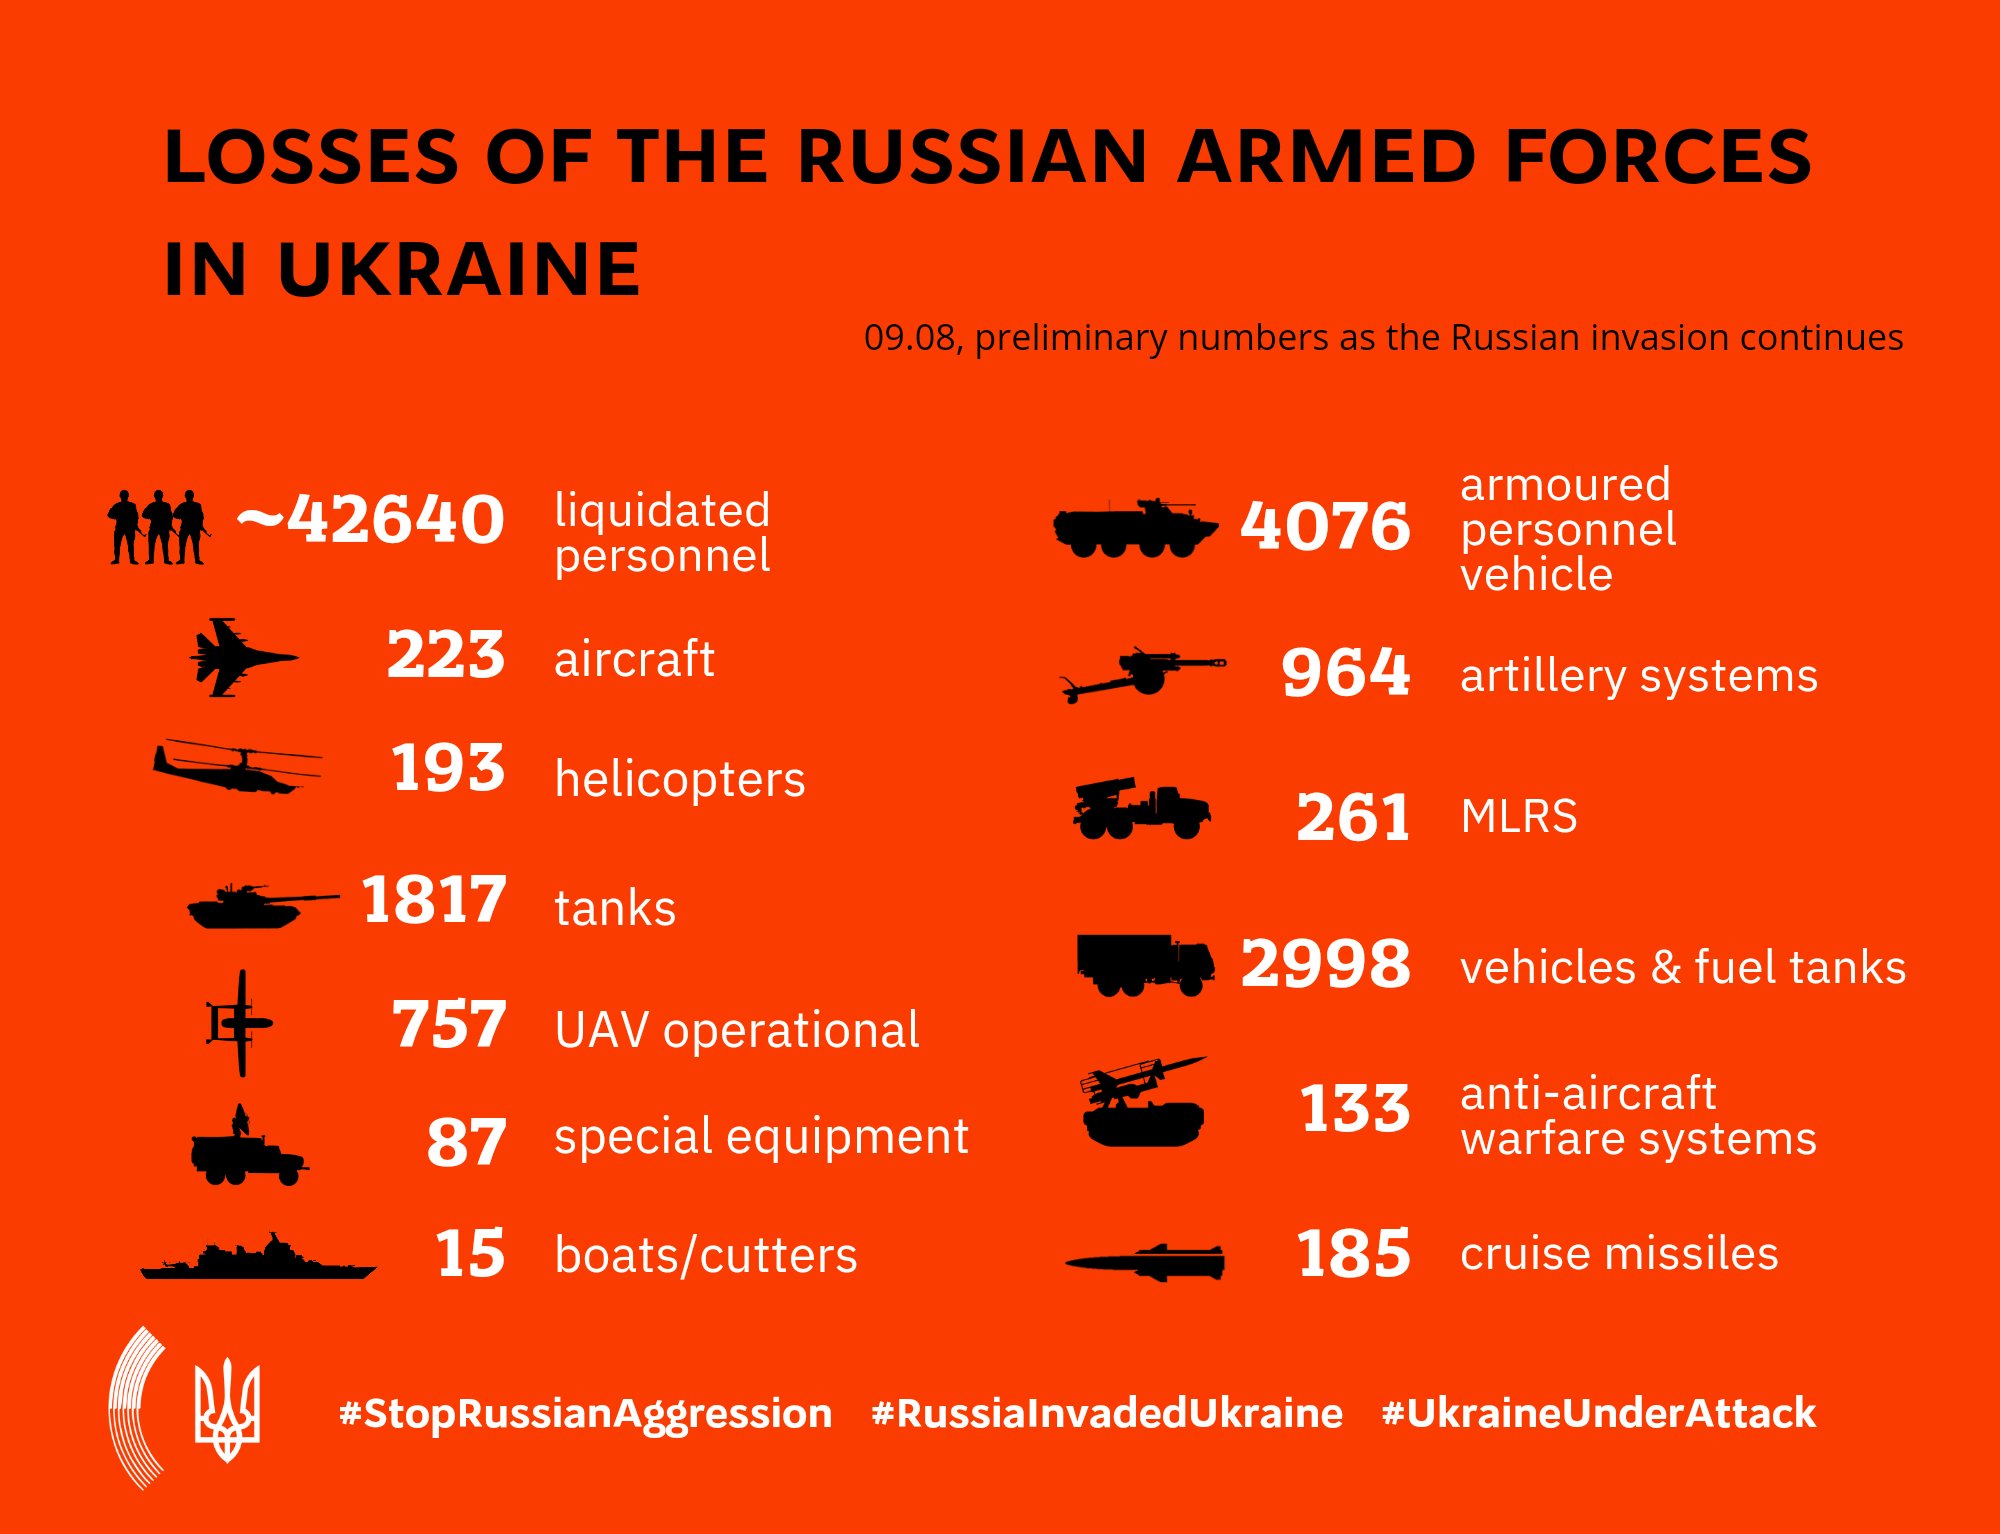 Mfa Of Ukraine 1 6 7 Days Of Full Scale Russia S War On Ukraine Information On Russian Invasion Losses Of The Russian Armed Forces In Ukraine August 9 T Co Gch1akhs8f Twitter